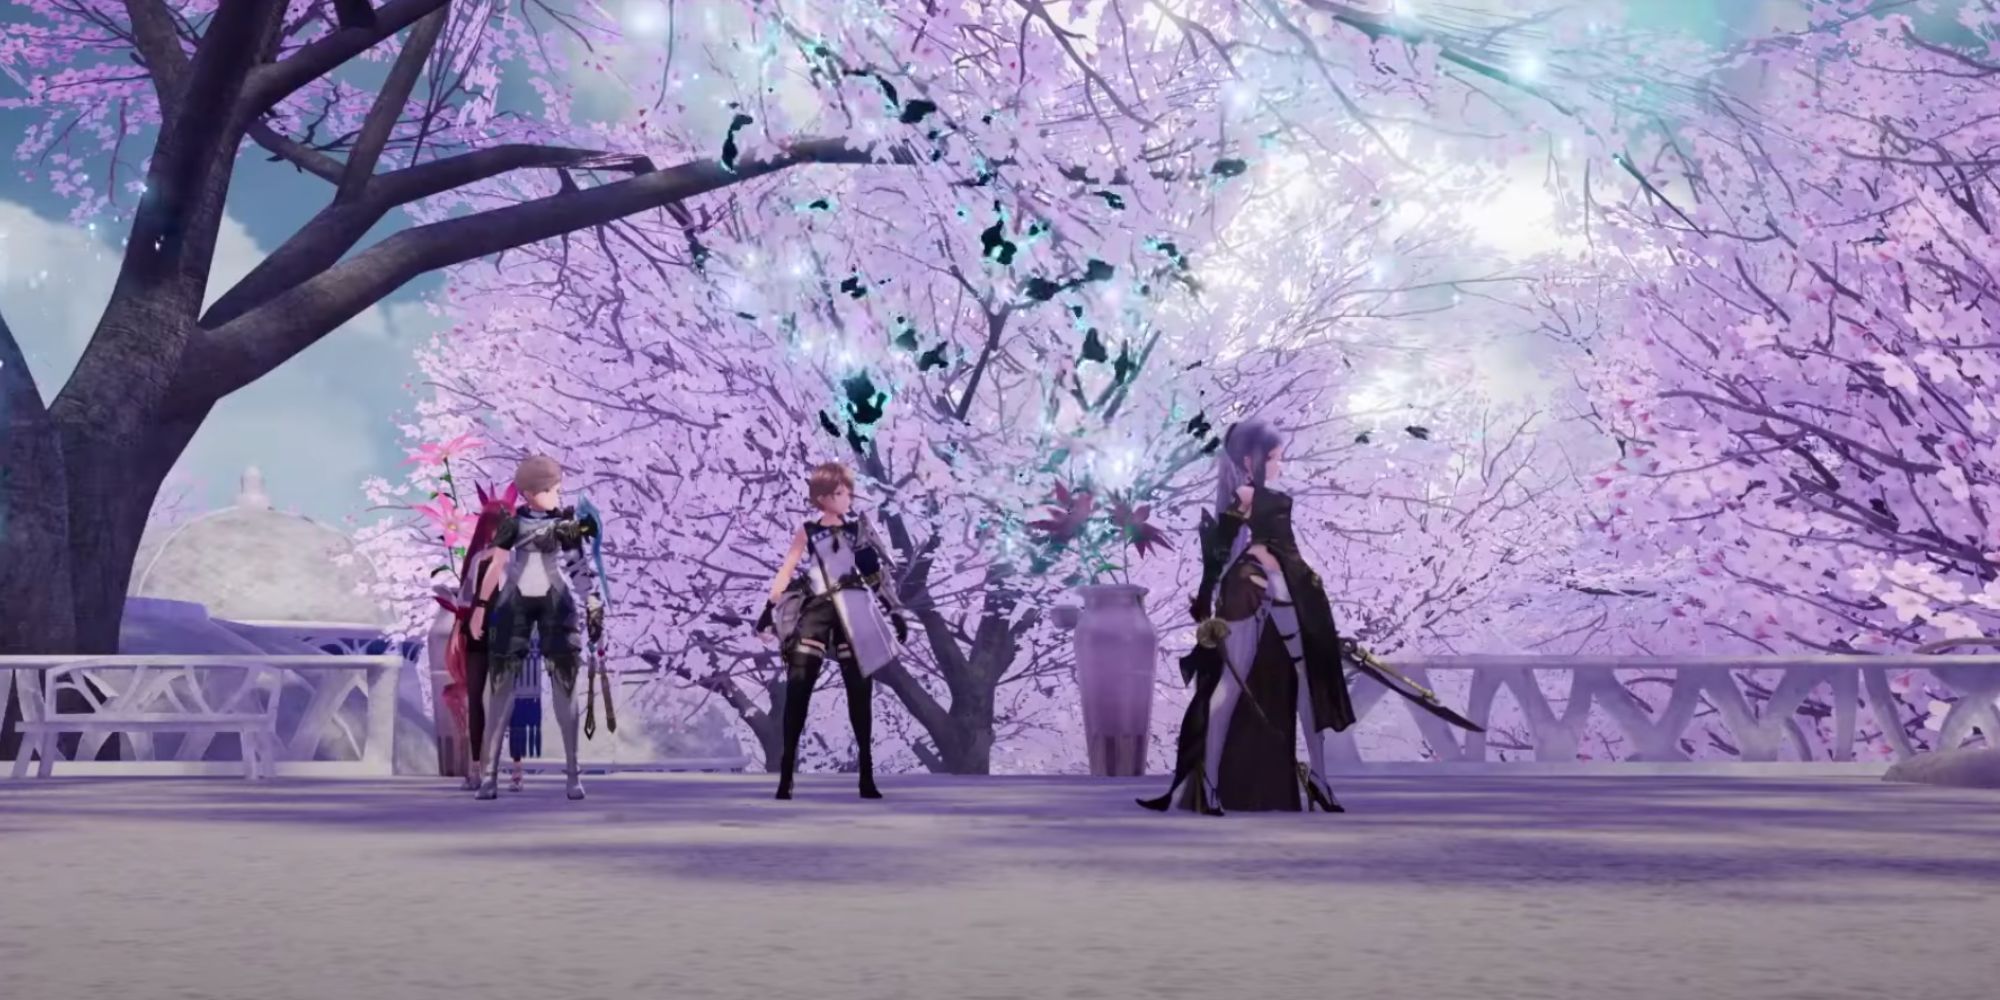 Characters on terrace with purple trees